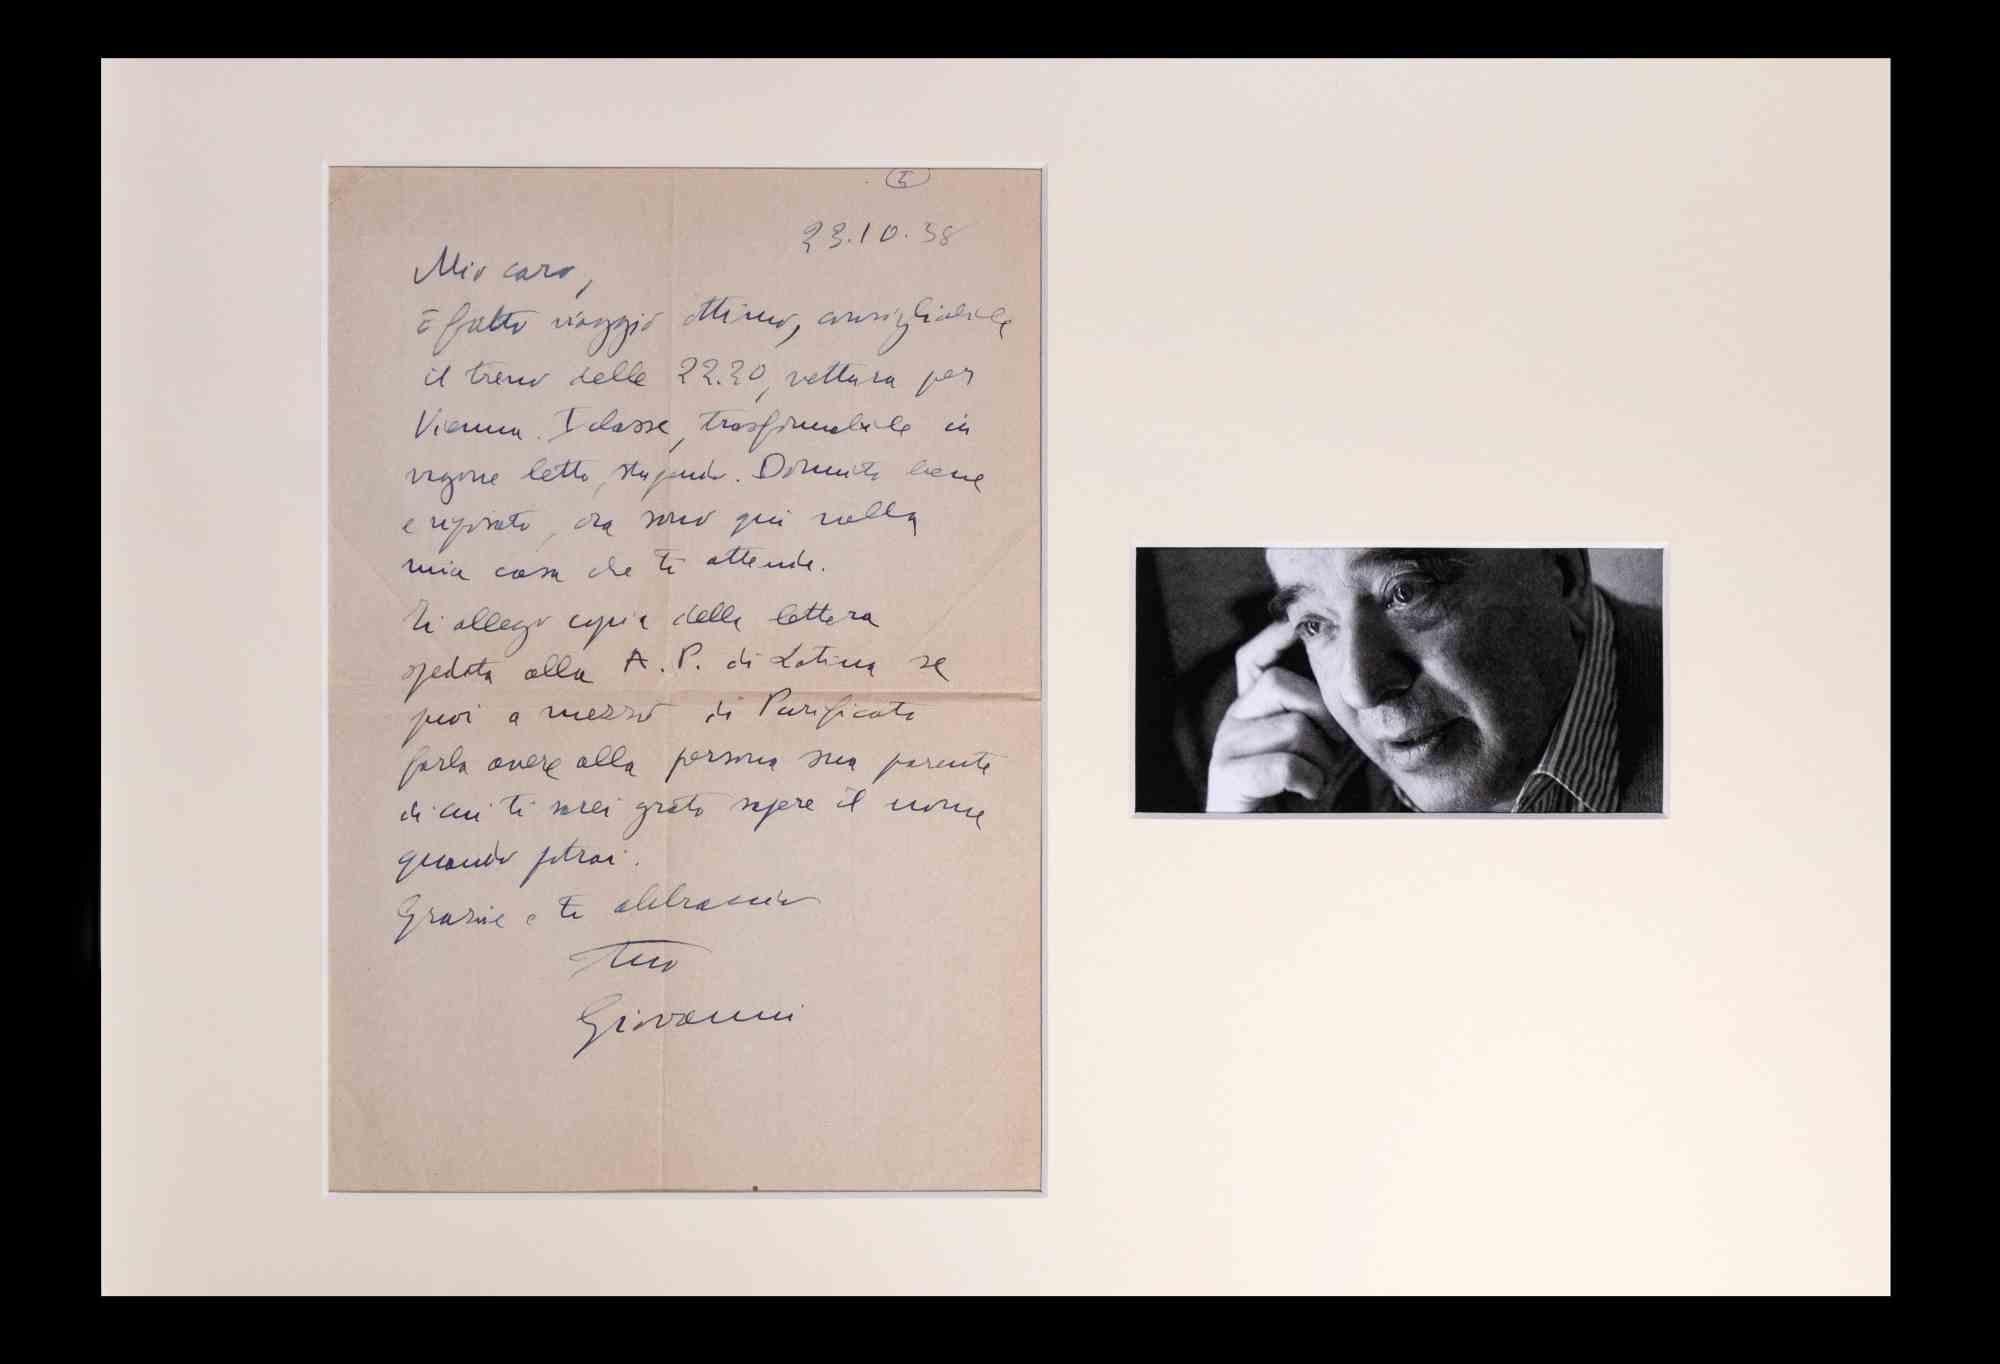 Letter from Giovanni Comisso (1895-1969).

Content of the letter: The writer is probably addressing a friend ("My dear.."), speaking of his journey to Vienna on the 10.30 pm train, in first class. He then asks for someone to have a copy of the